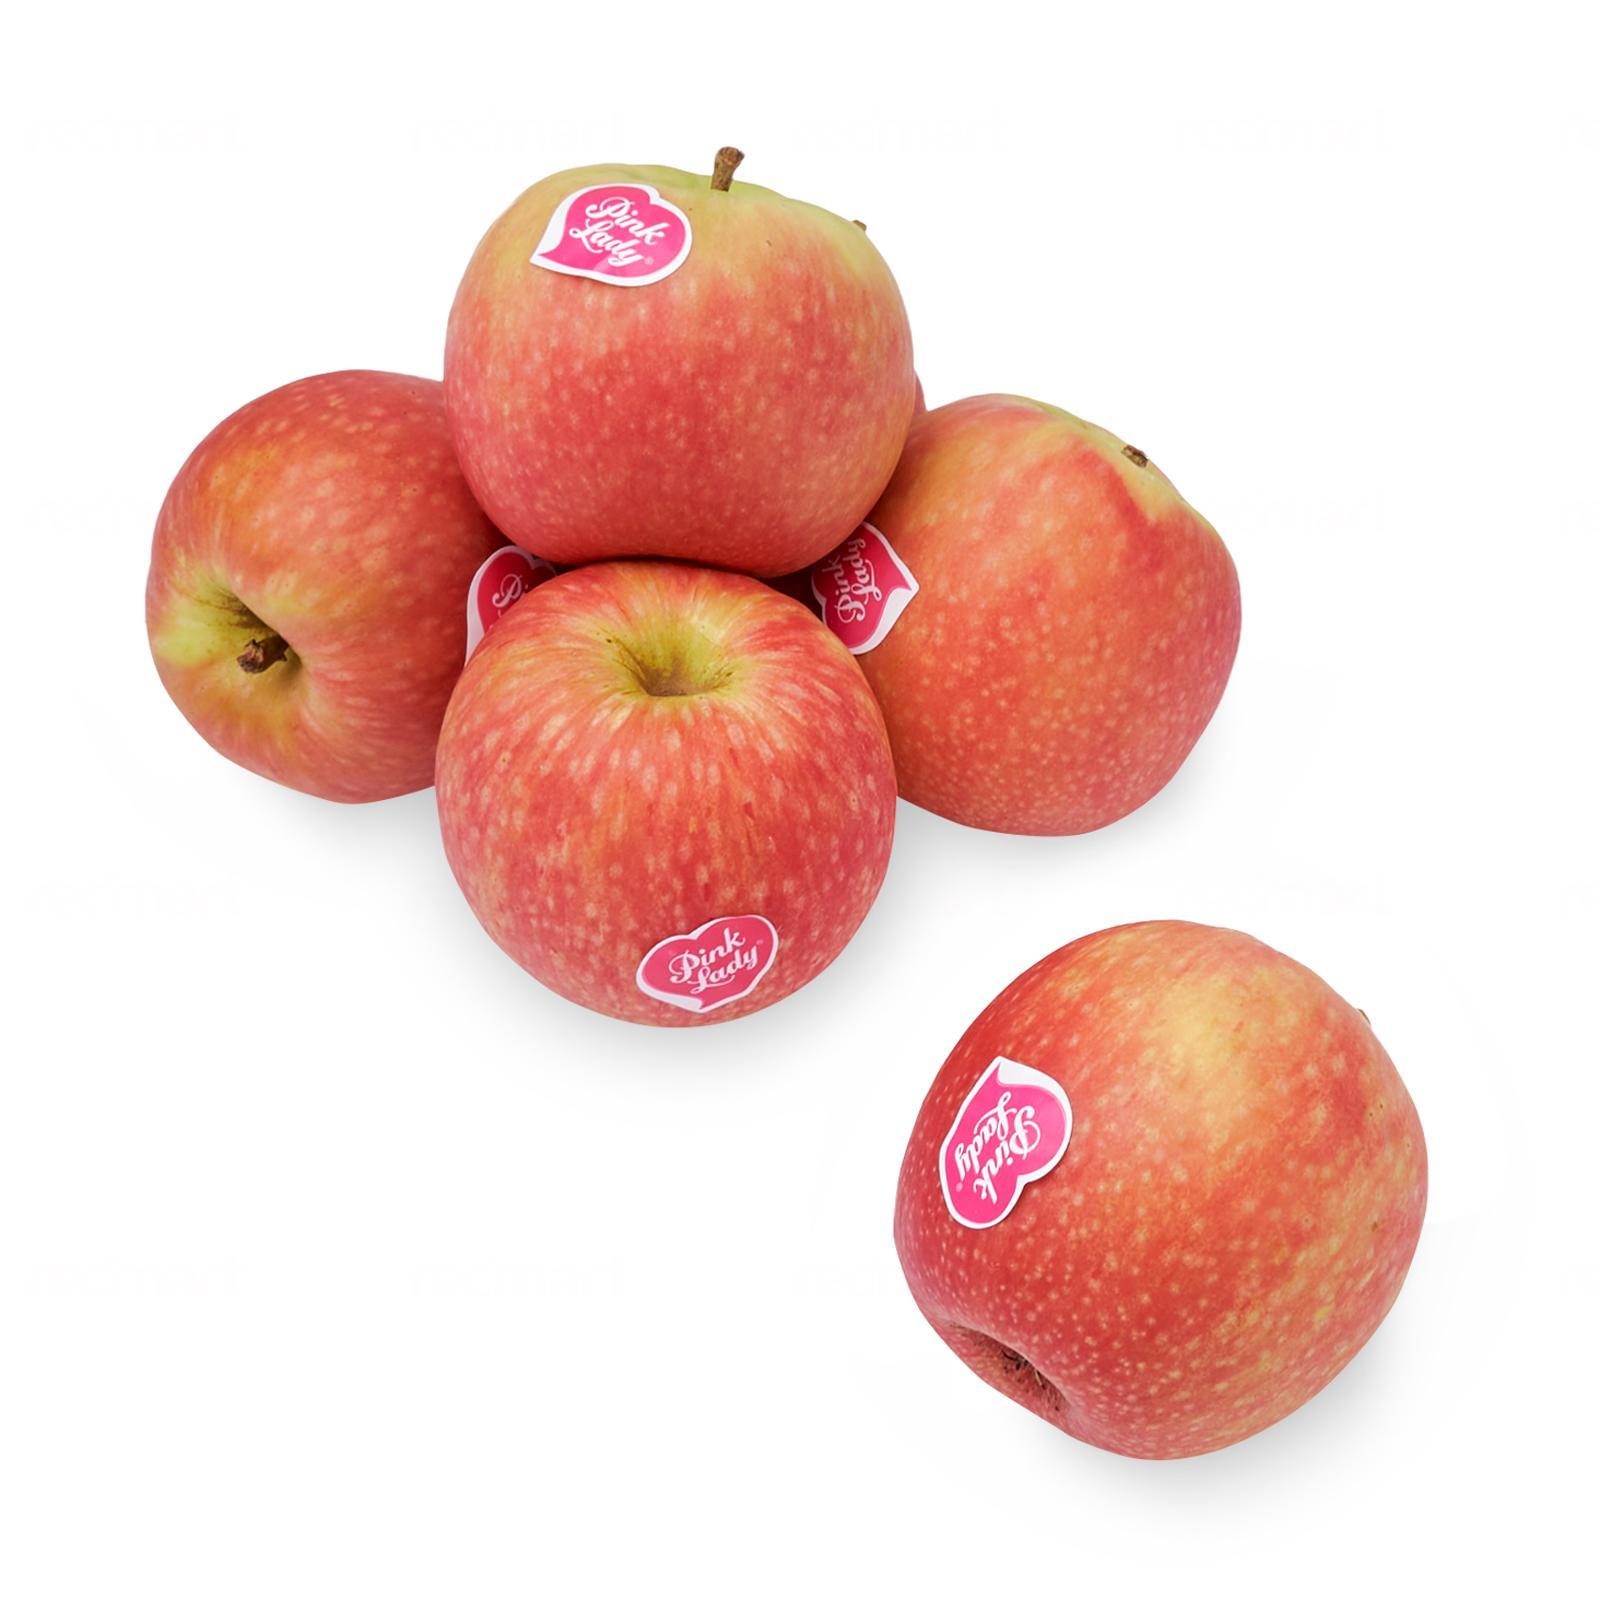 Pinkids Pink Lady Apples 6 Pack, Fresh Fruit